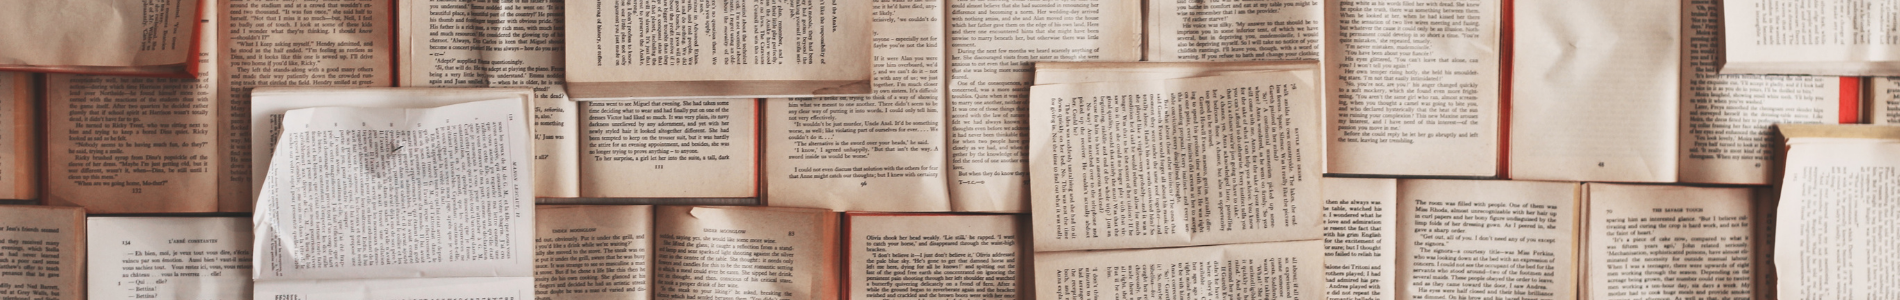 open book images booklovers webpage banner